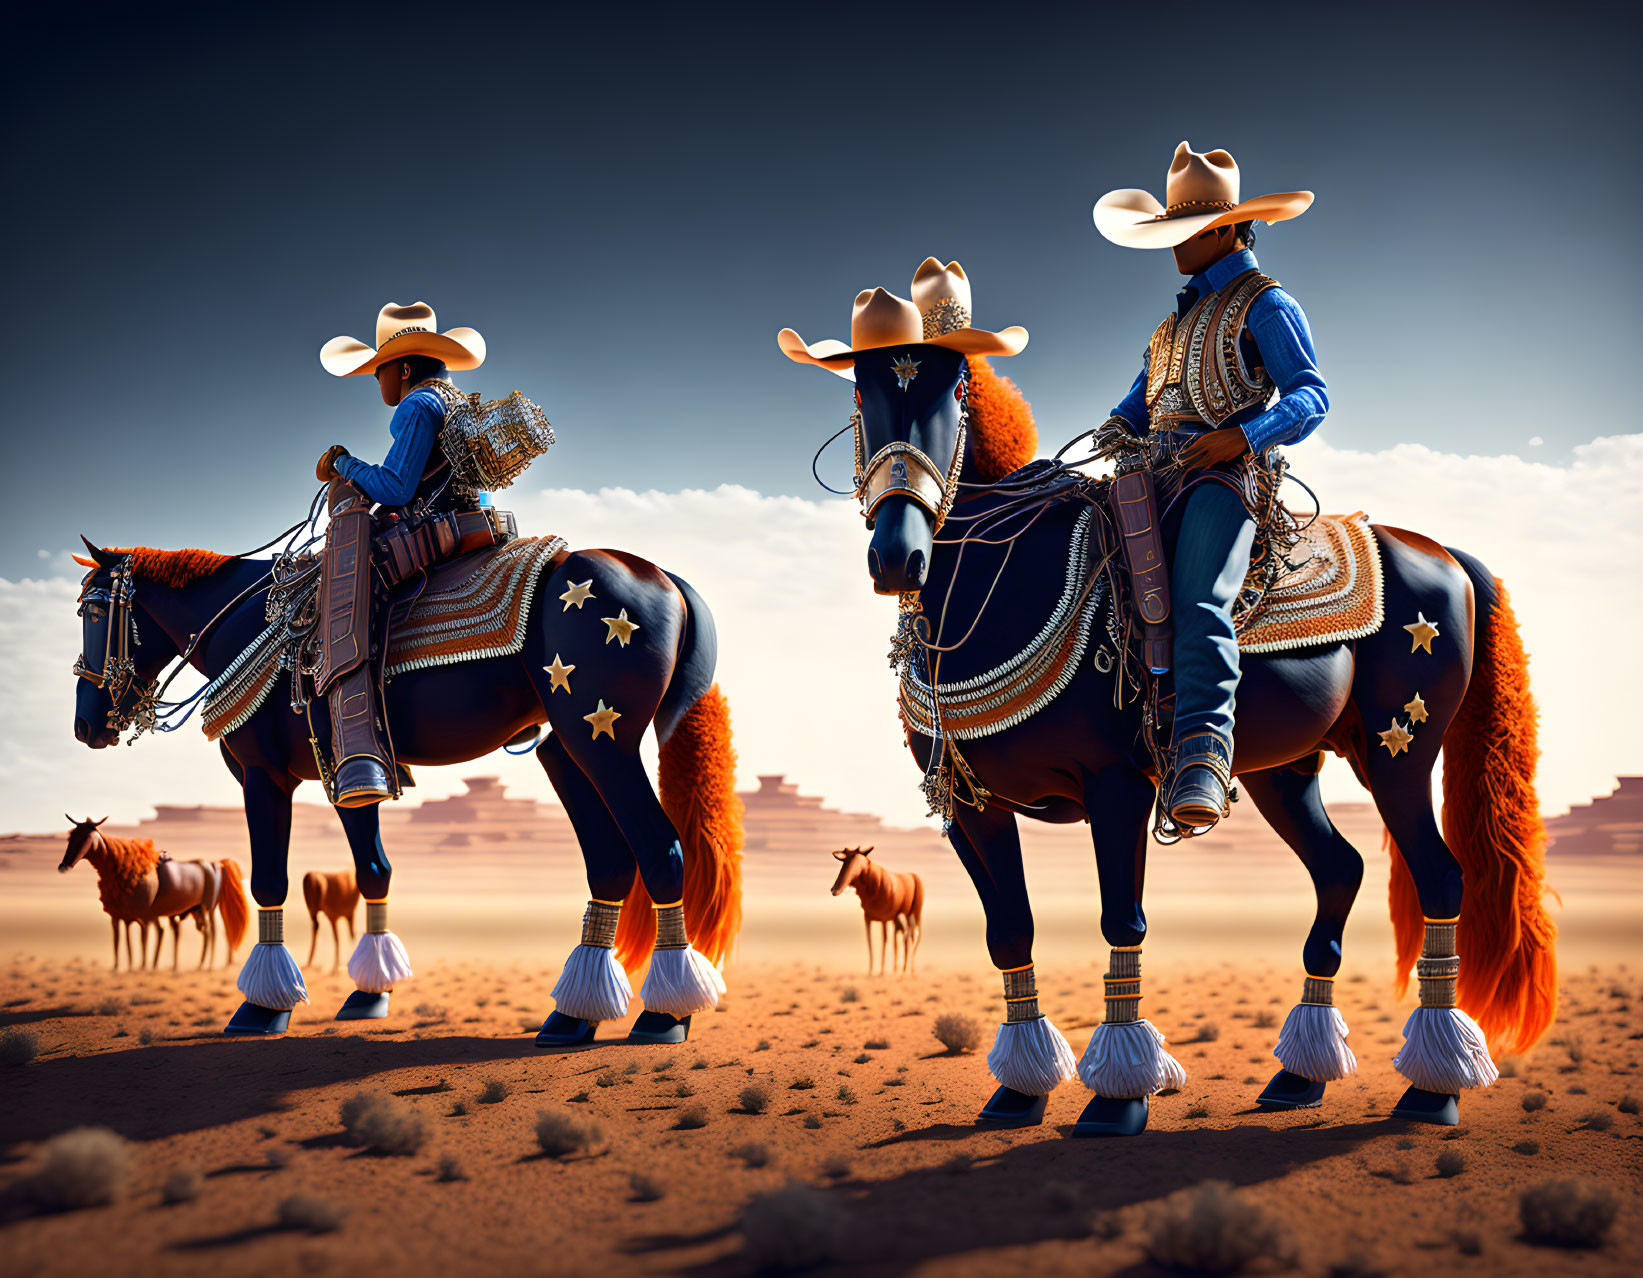 Two cowboys in ornate outfits and wide-brimmed hats on decorated horses in a desert landscape